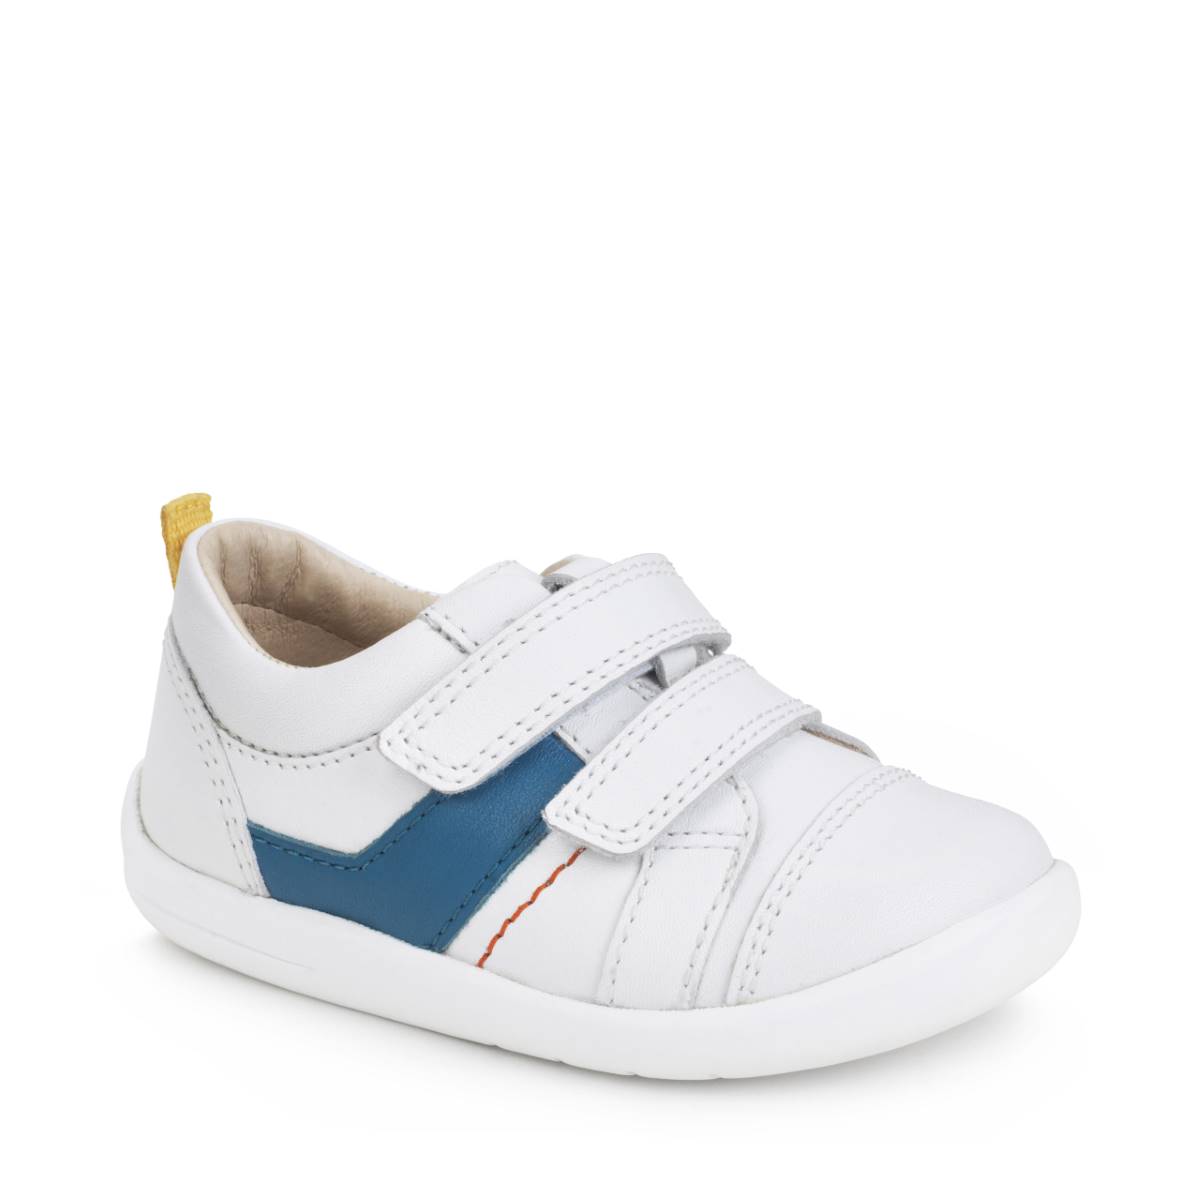 Start Rite Maze WHITE LEATHER Kids Boys Toddler Shoes 0818-46F in a Plain Leather in Size 5.5